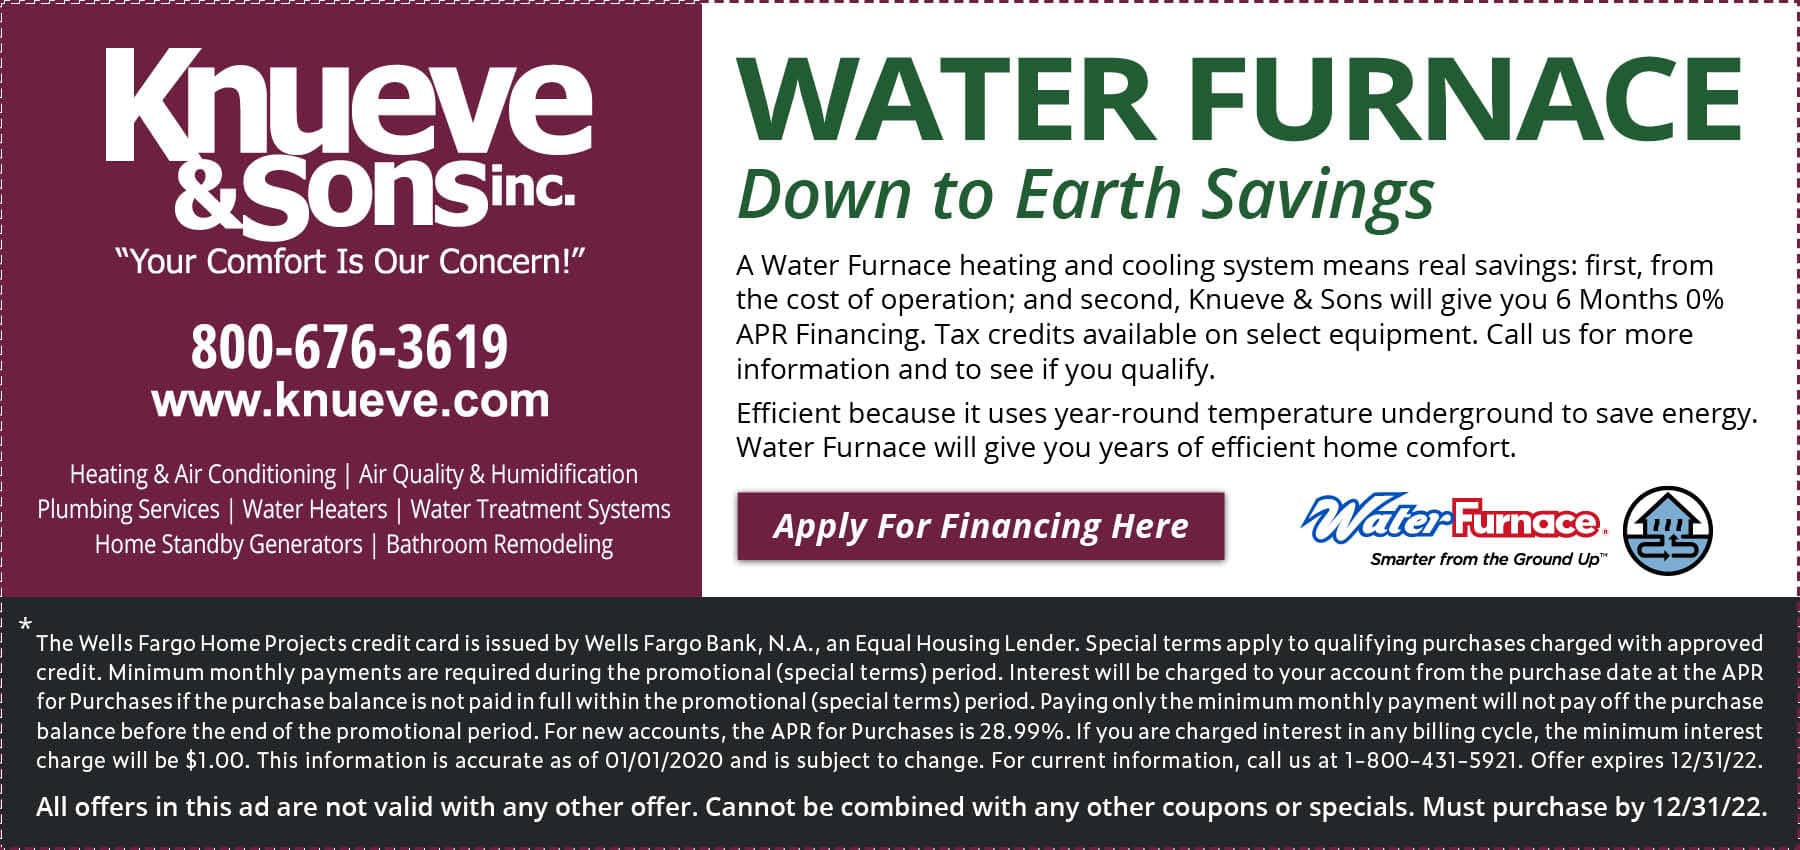 Water furnace down to earth savings. Expires 12/13/2022